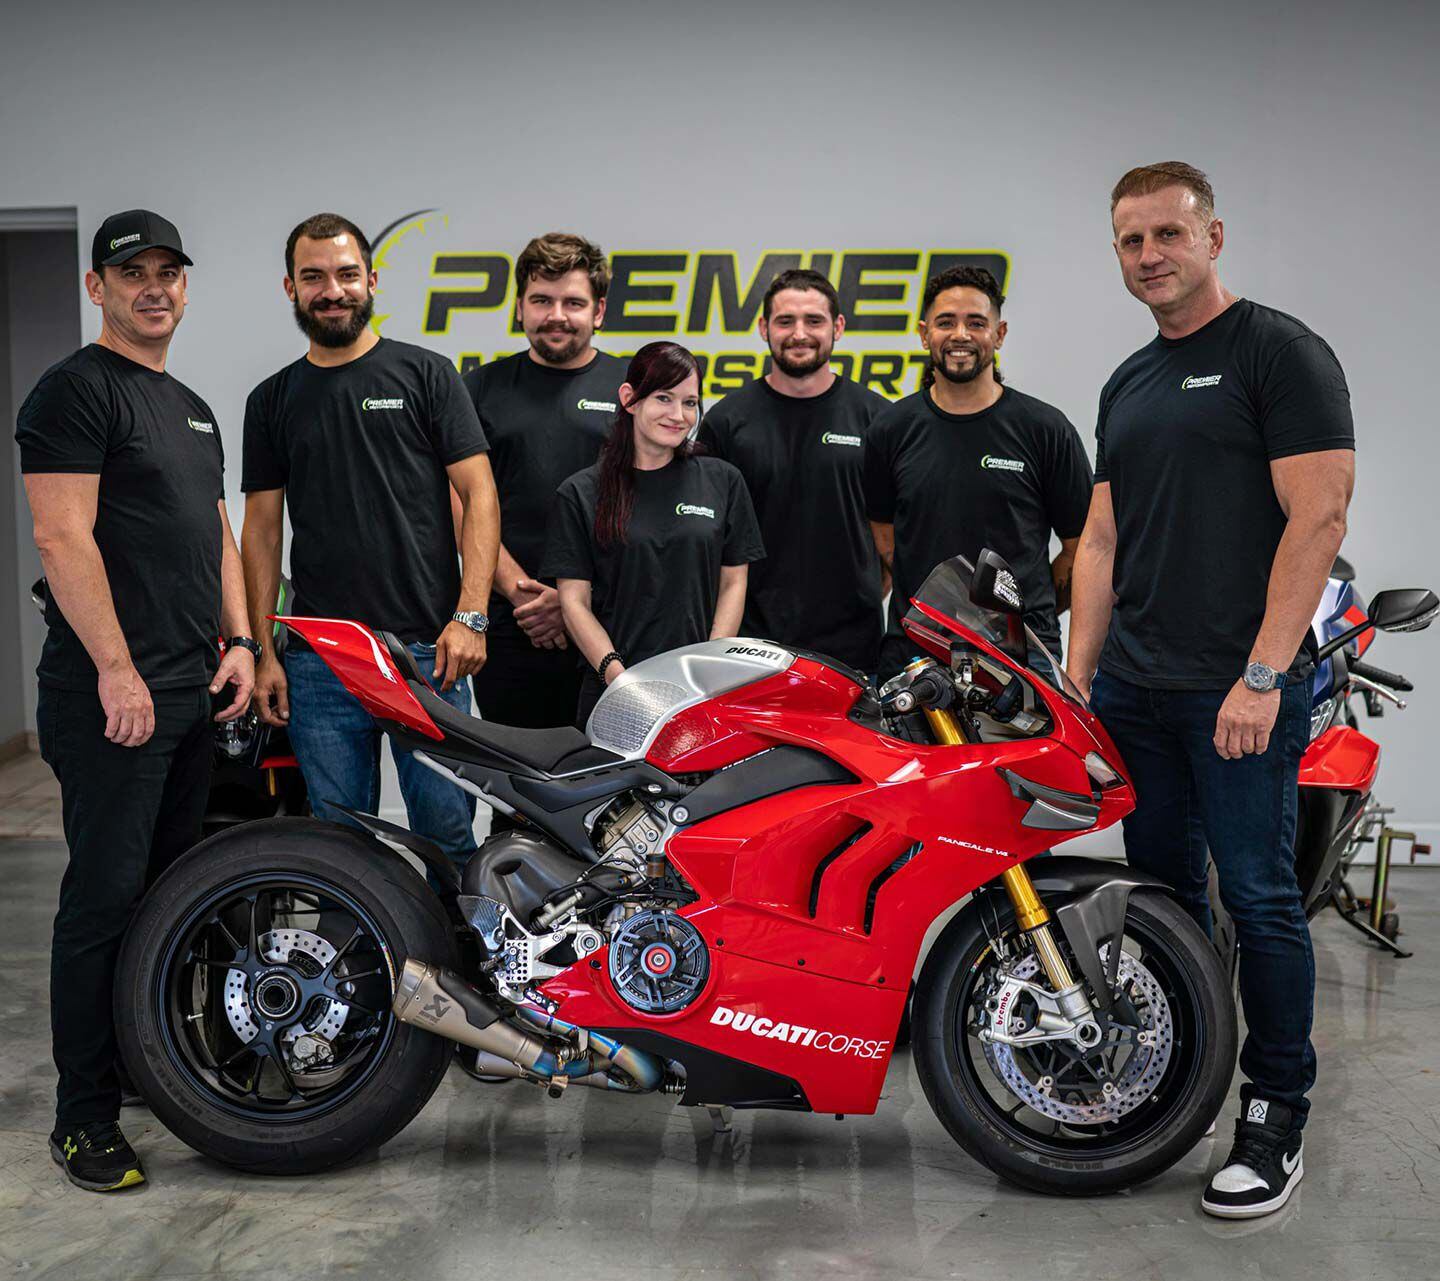 Find out what makes a dealership stand out; Premier Motorsports embraces no-pressure rider education to help match the buyer with the bike that is best for their wants and needs.